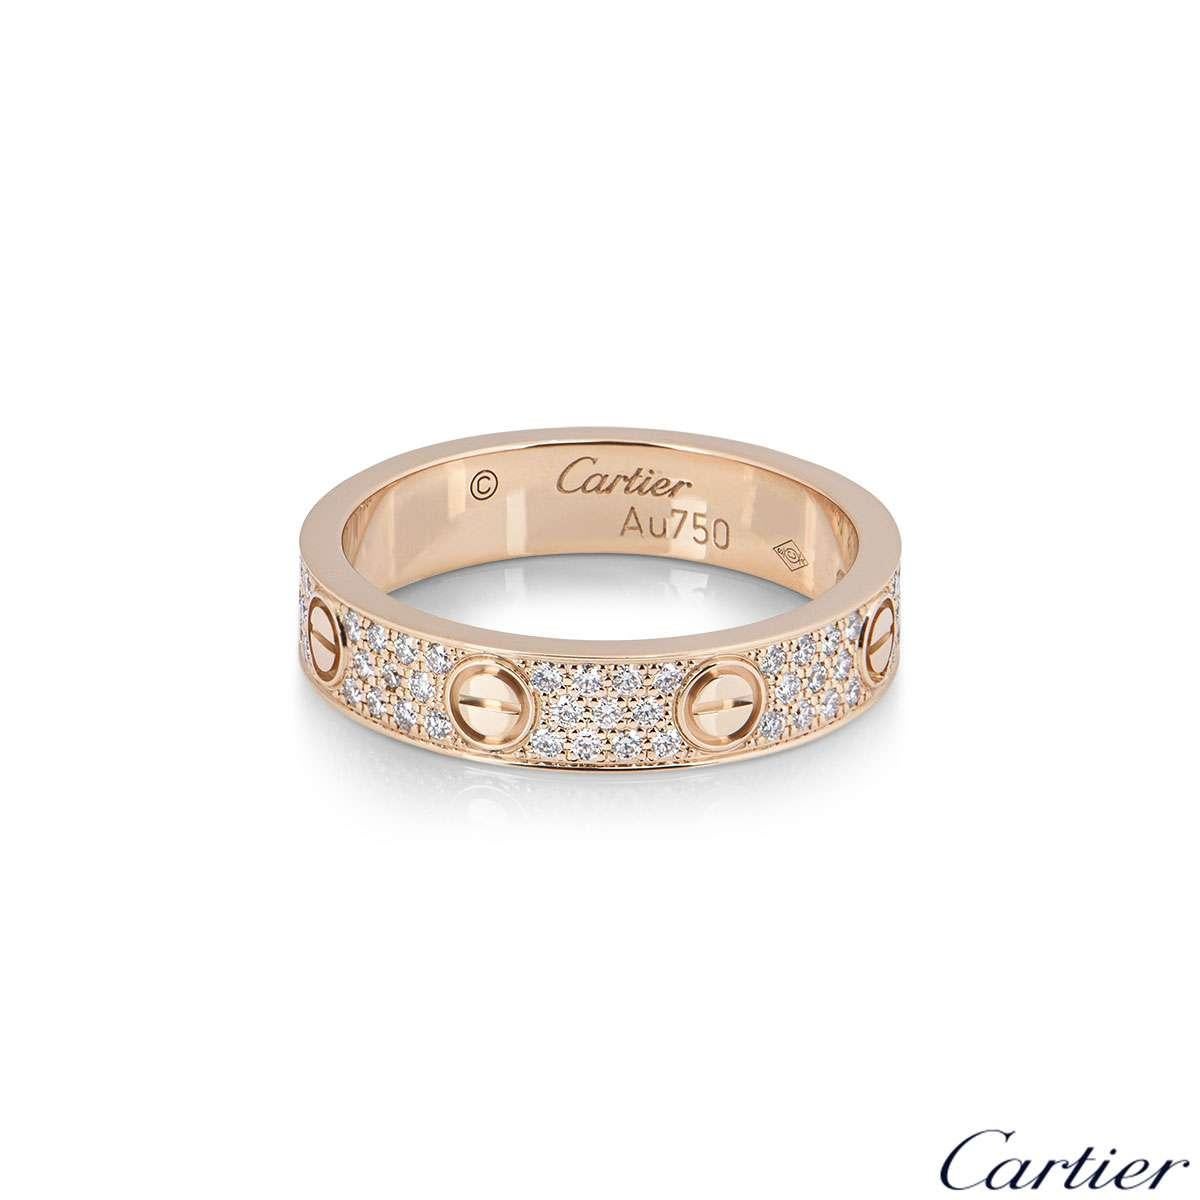 An 18k rose gold Cartier diamond pave ring from the Love collection B4085800. The ring comprises of the iconic screw motifs displayed around the outer edges with 88 round brilliant cut diamonds totalling 0.31ct set between each screw motif. The ring